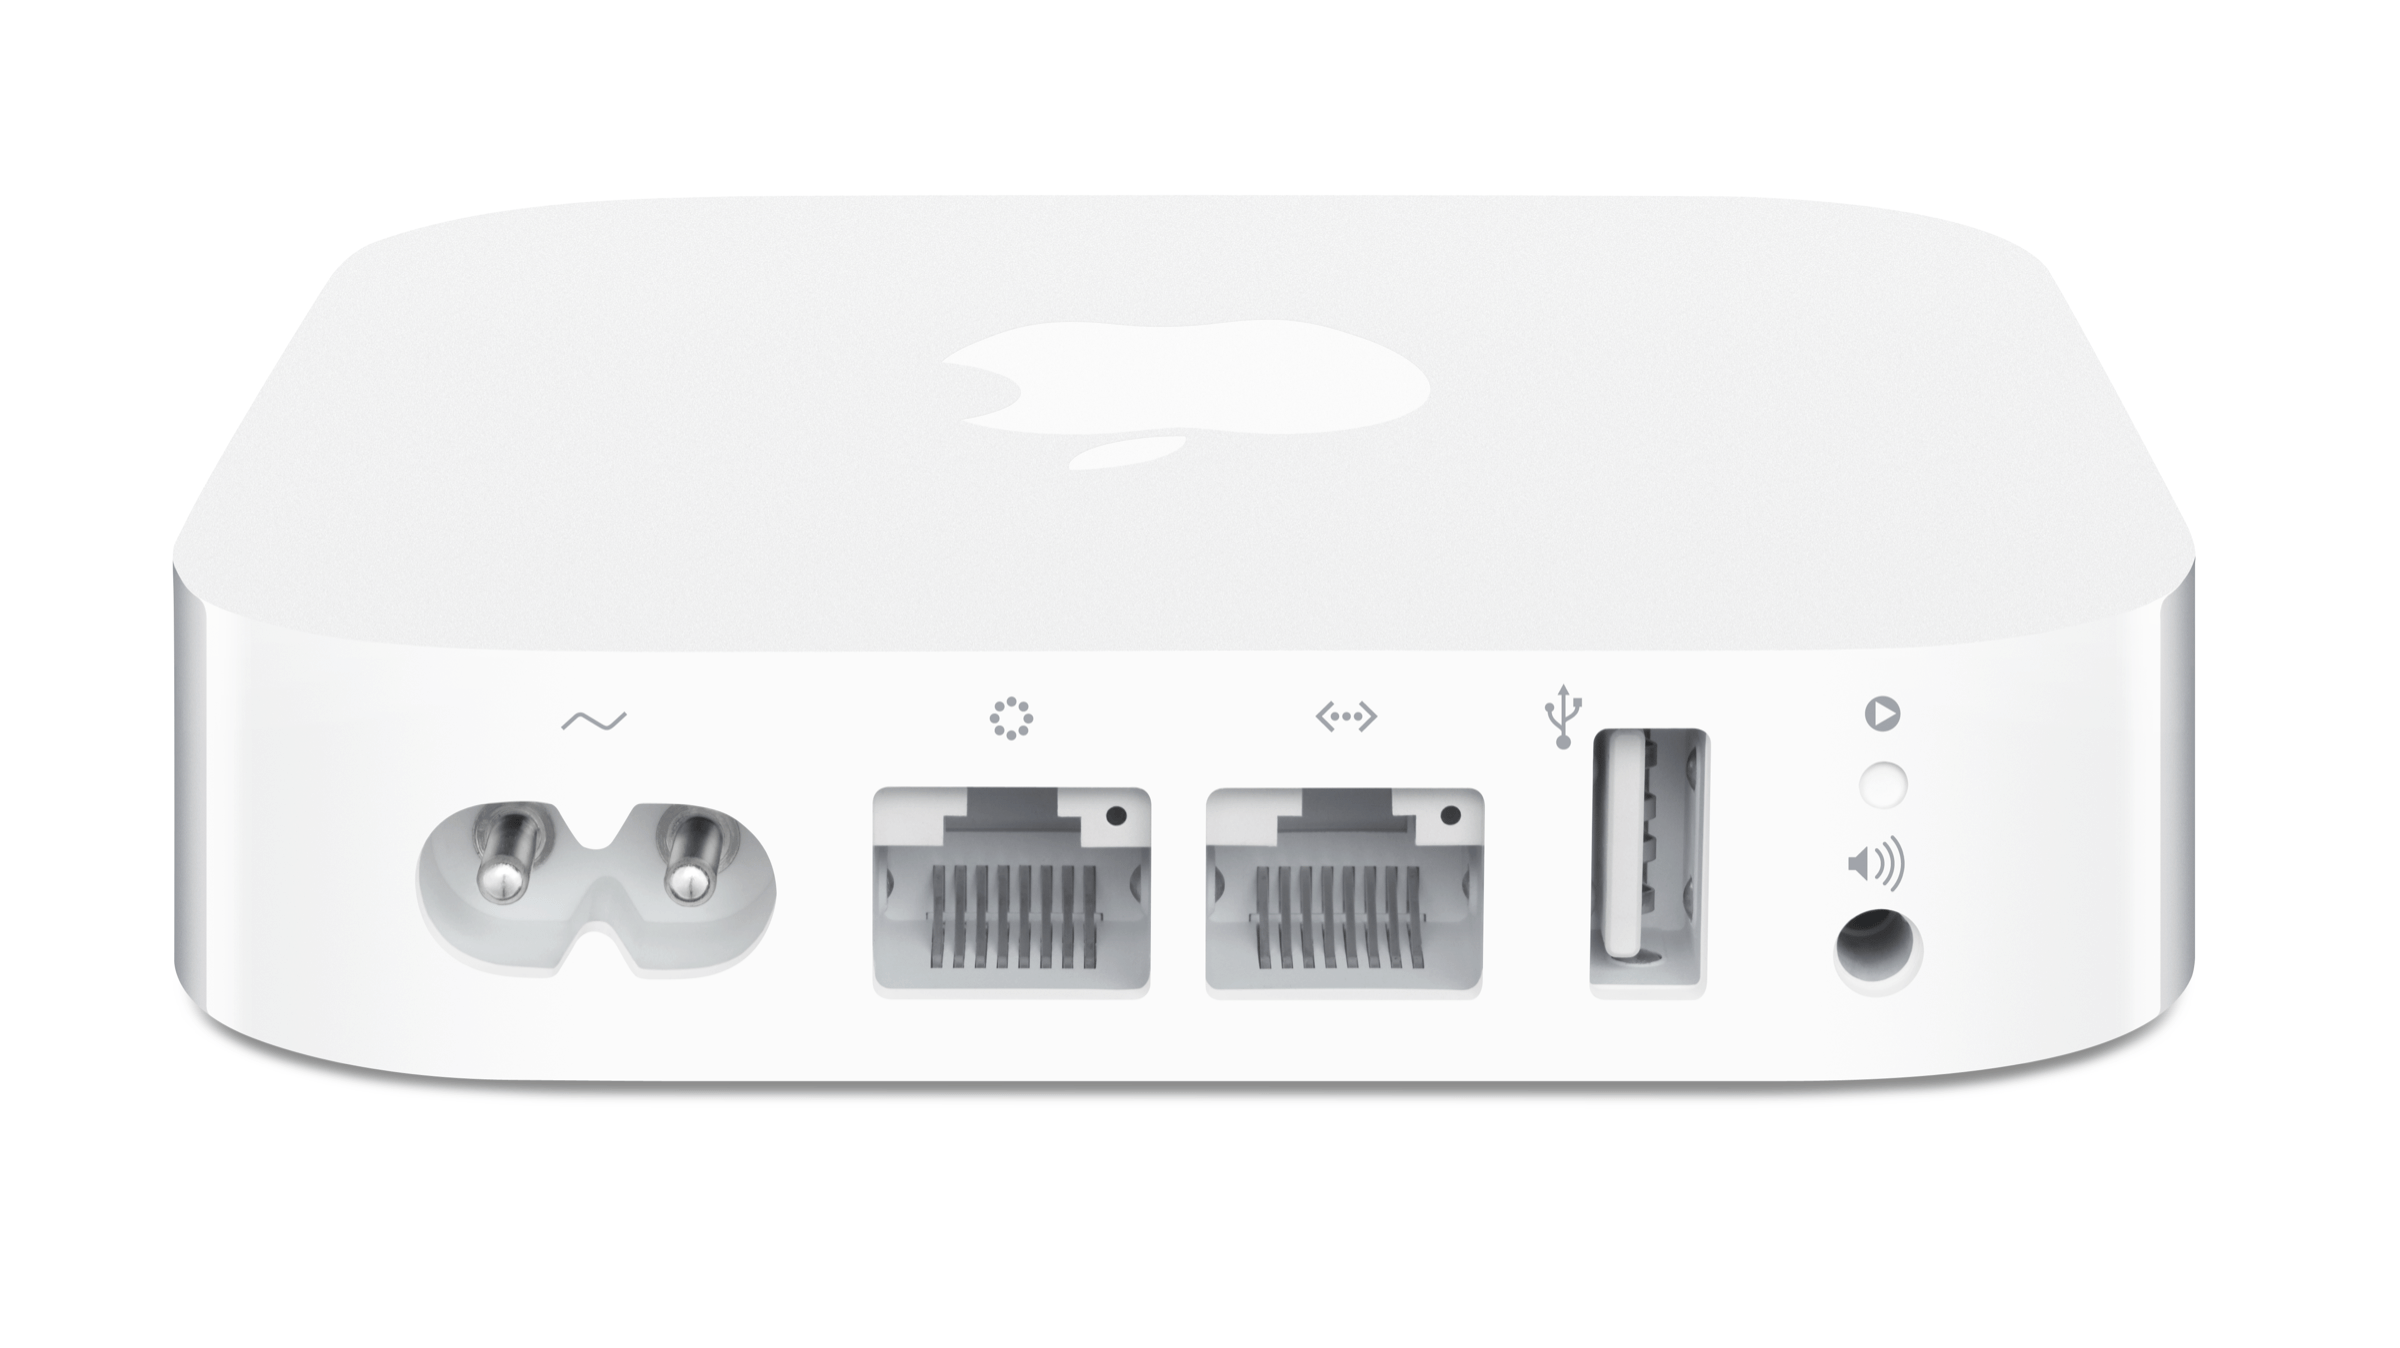 Apple AirPort Express Ports